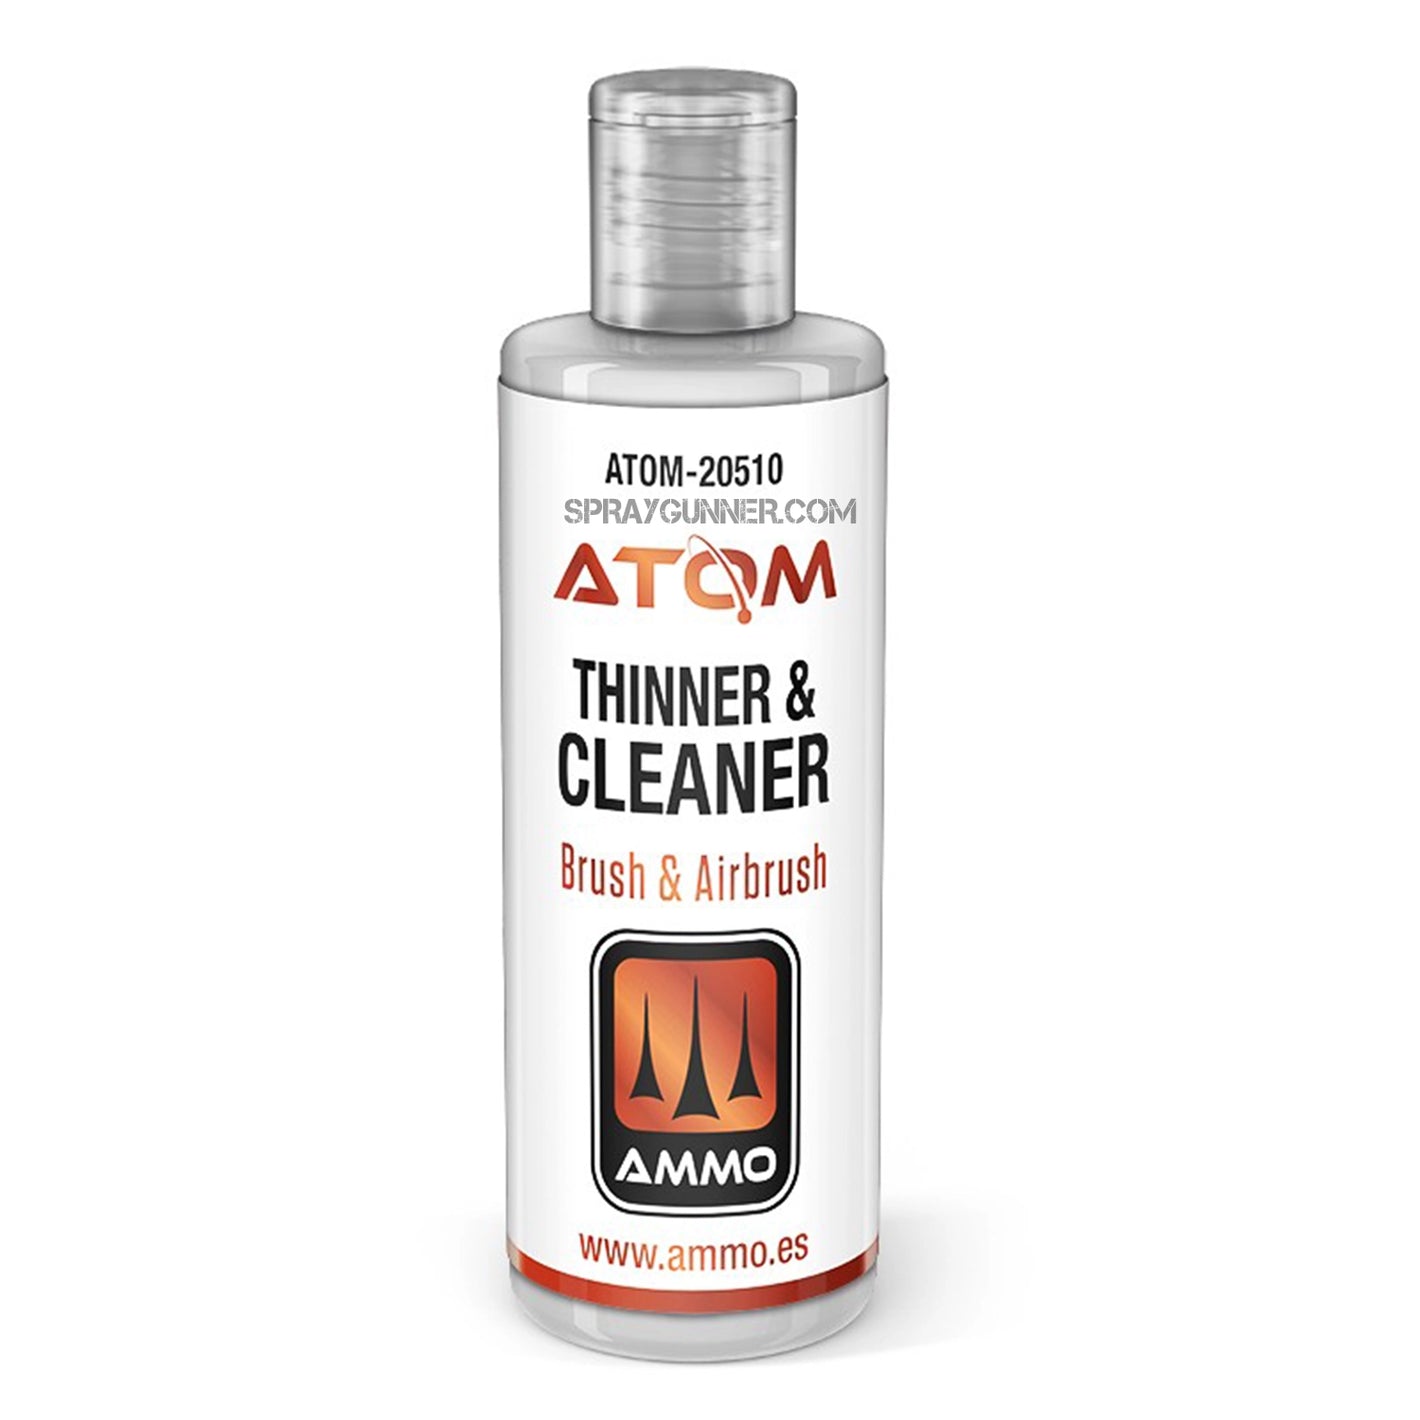 ATOM Thinner and Cleaner 60mL